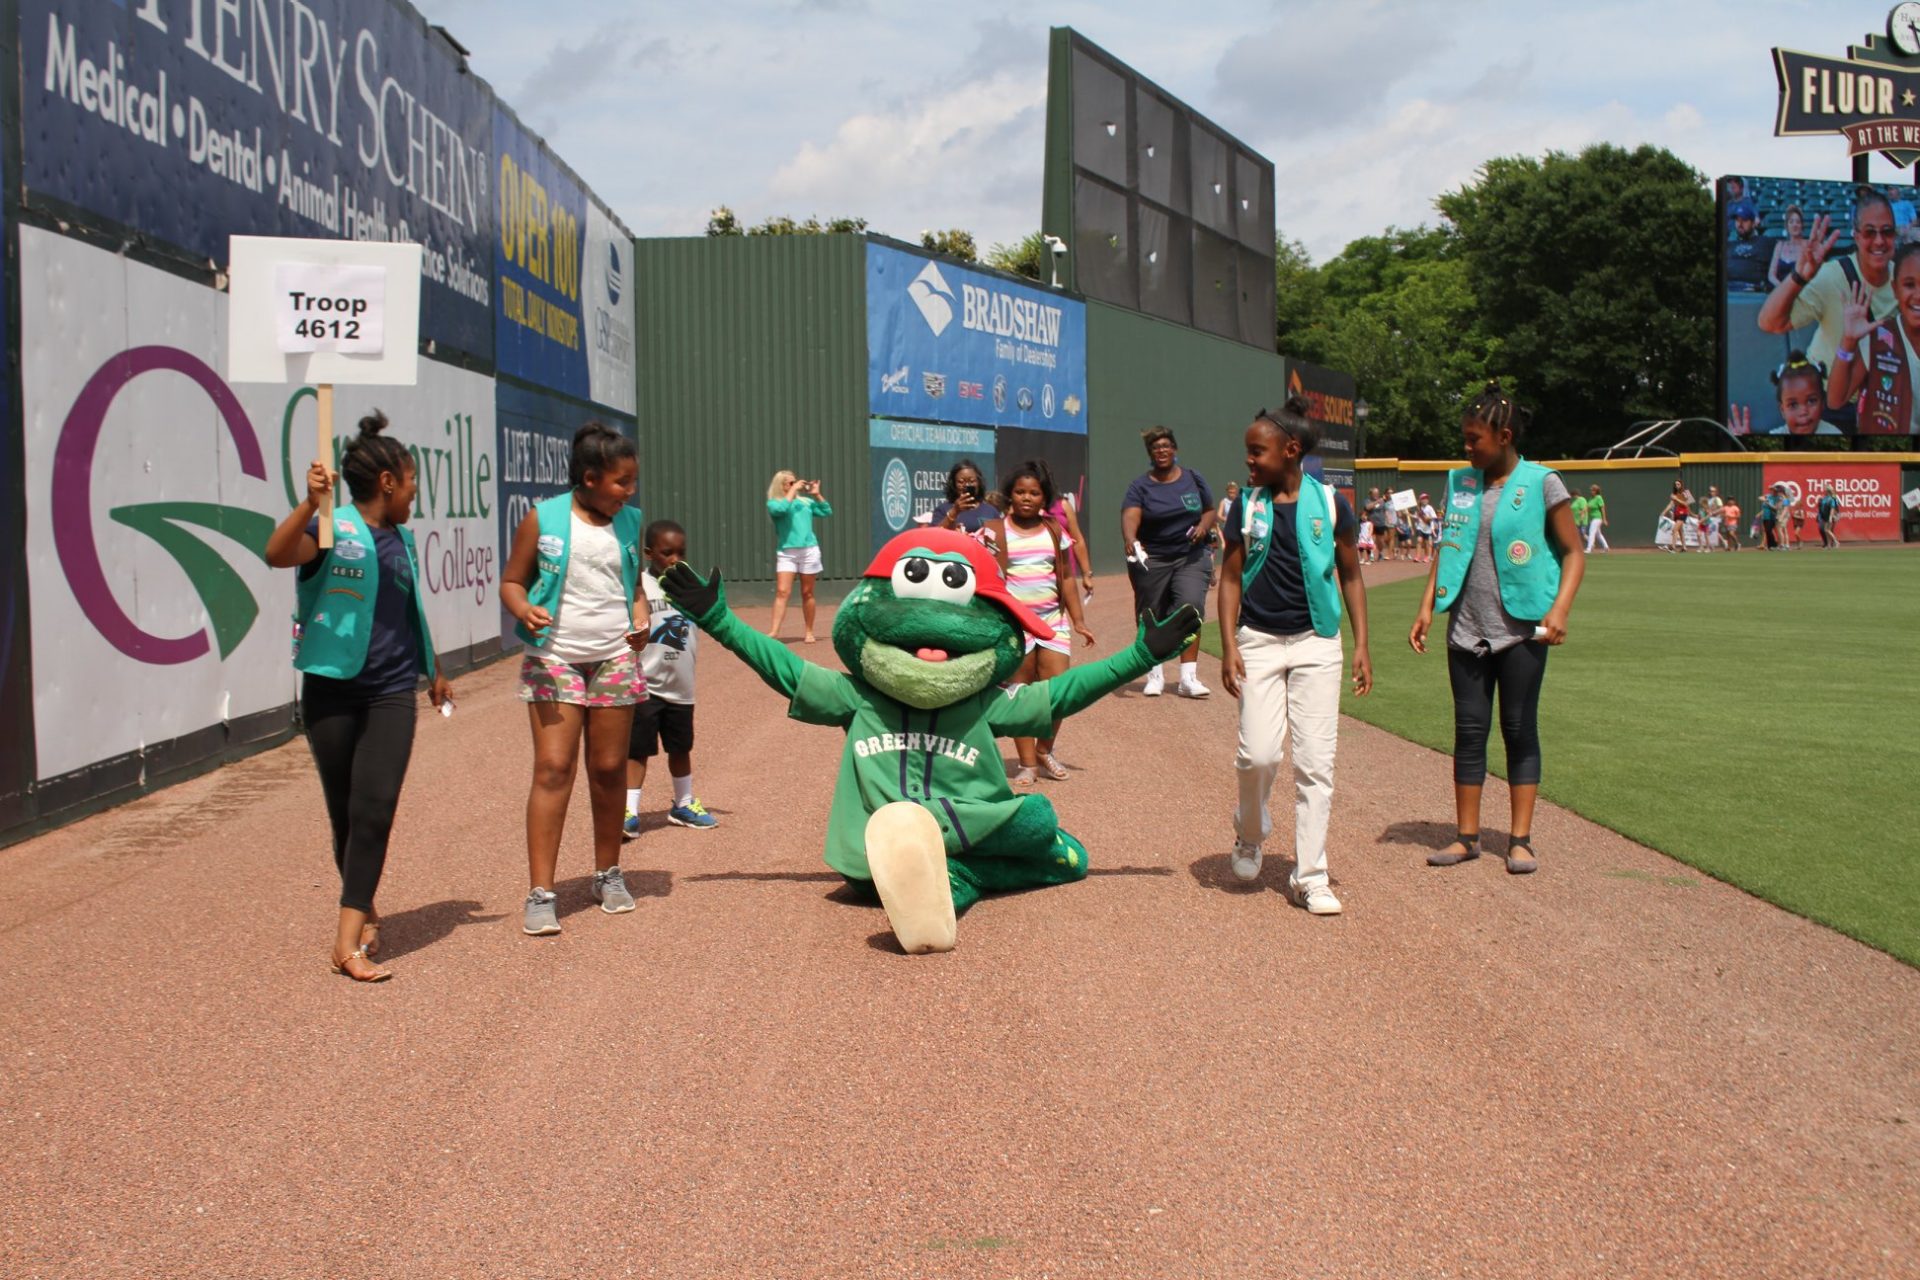  A group of Girl Scouts in uniform smile at Greenville Drive mascot doing a split on the field during Girl Scout Day at the Greenville Drive. 